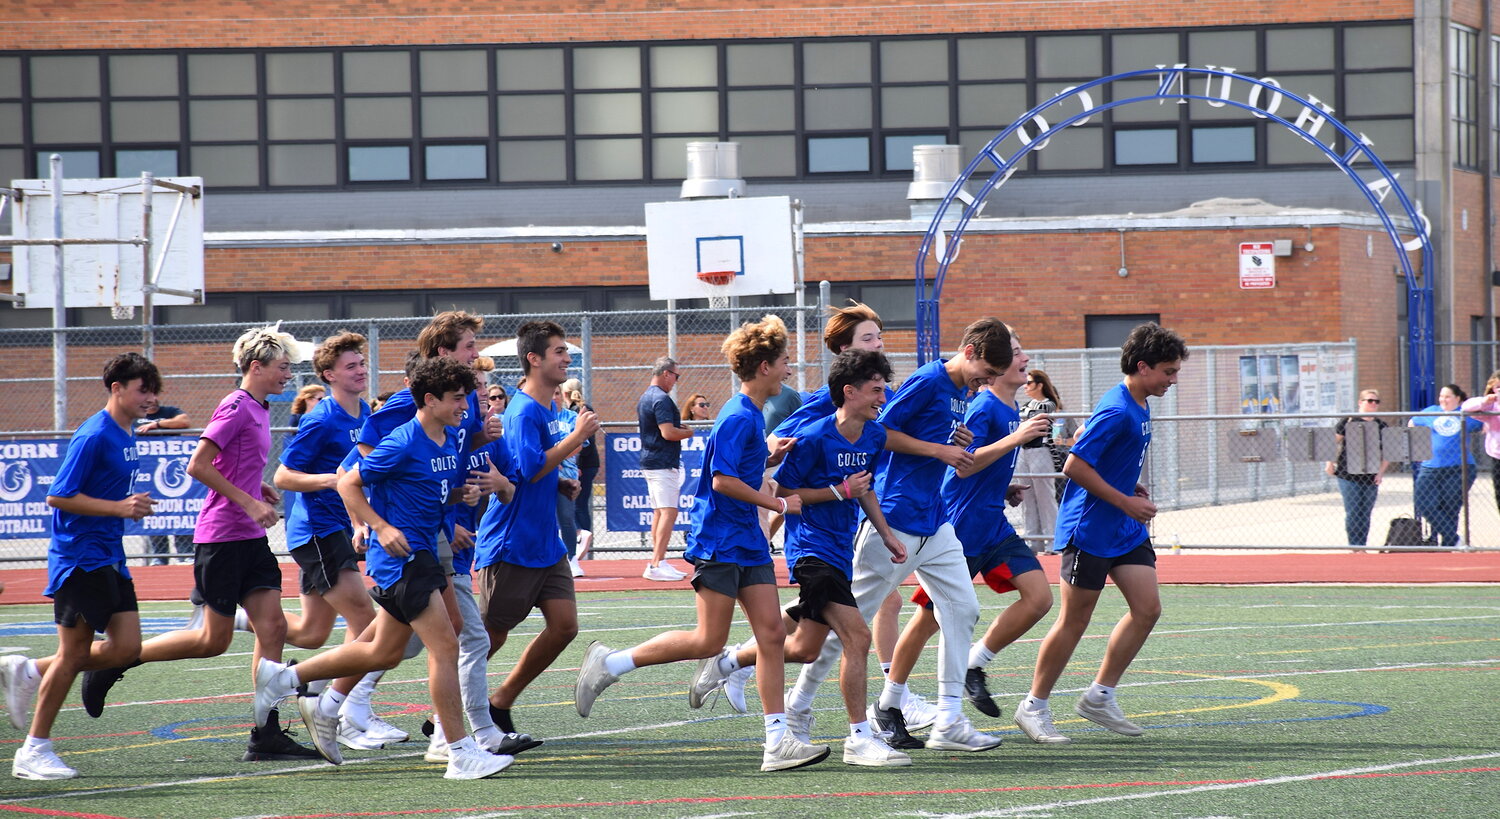 The boys soccer team charged onto the field  during the Sept. 22 pep rally.